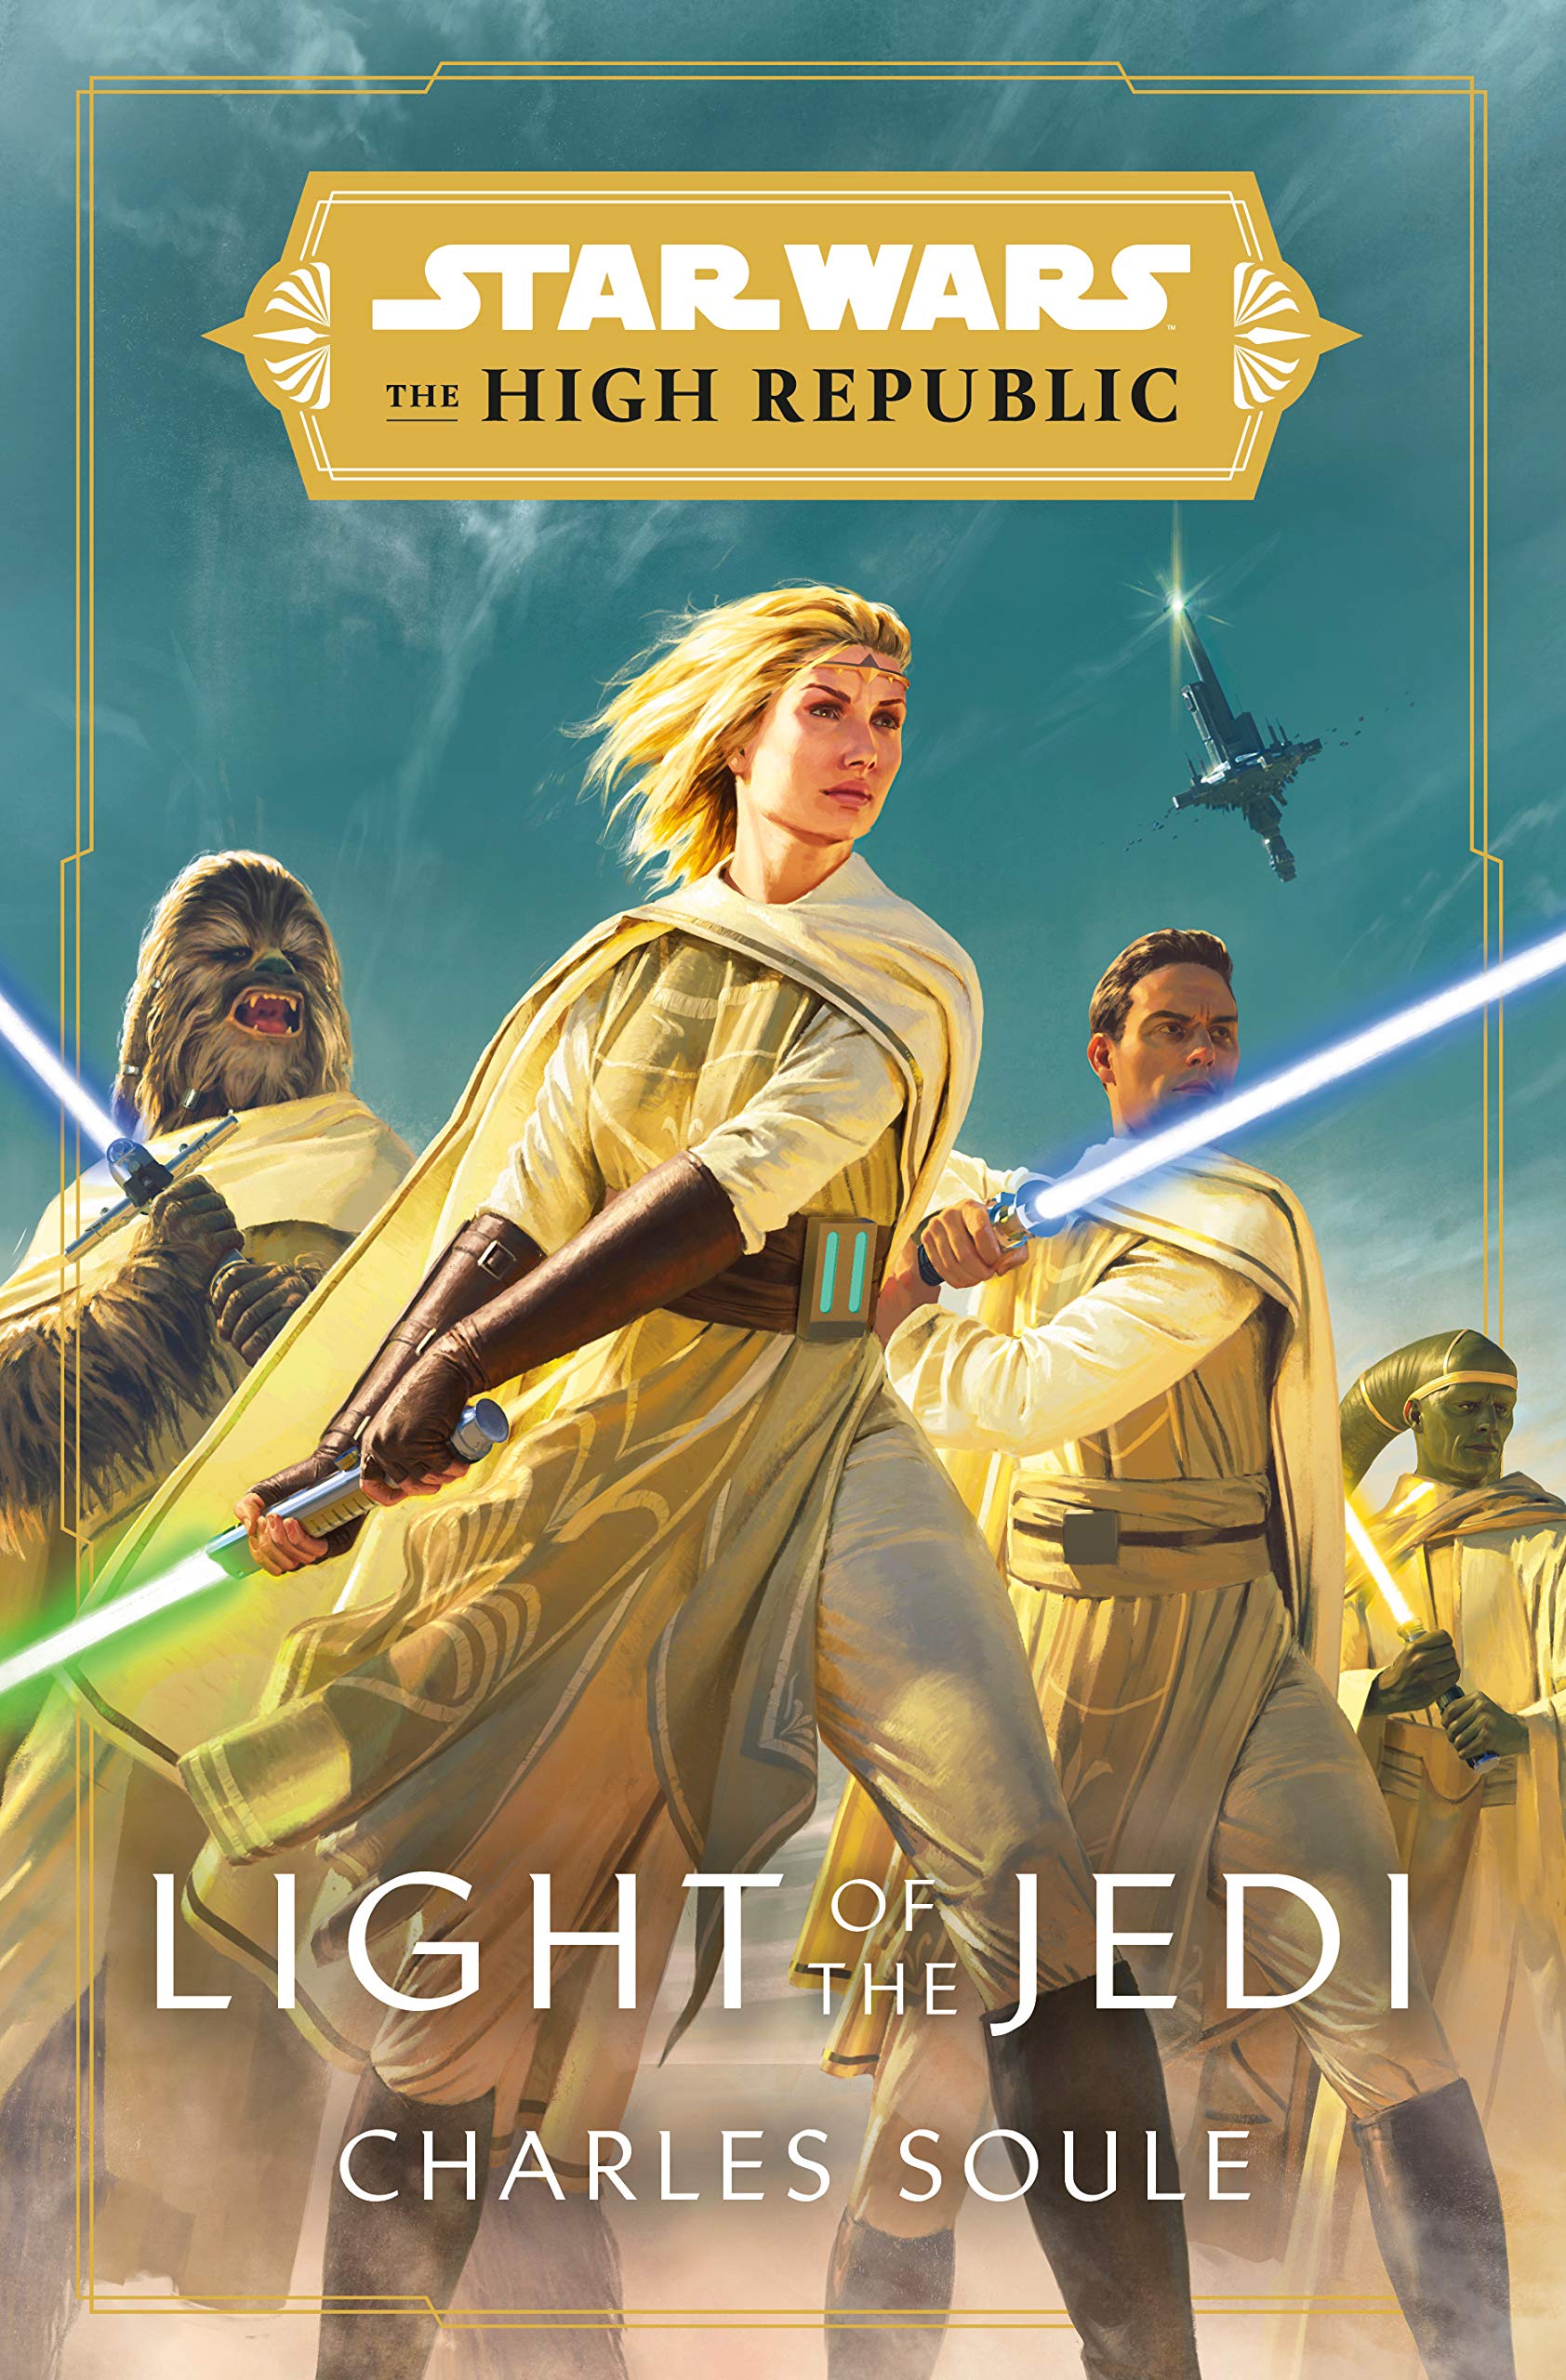 What are the best Star Wars books about the Jedi?